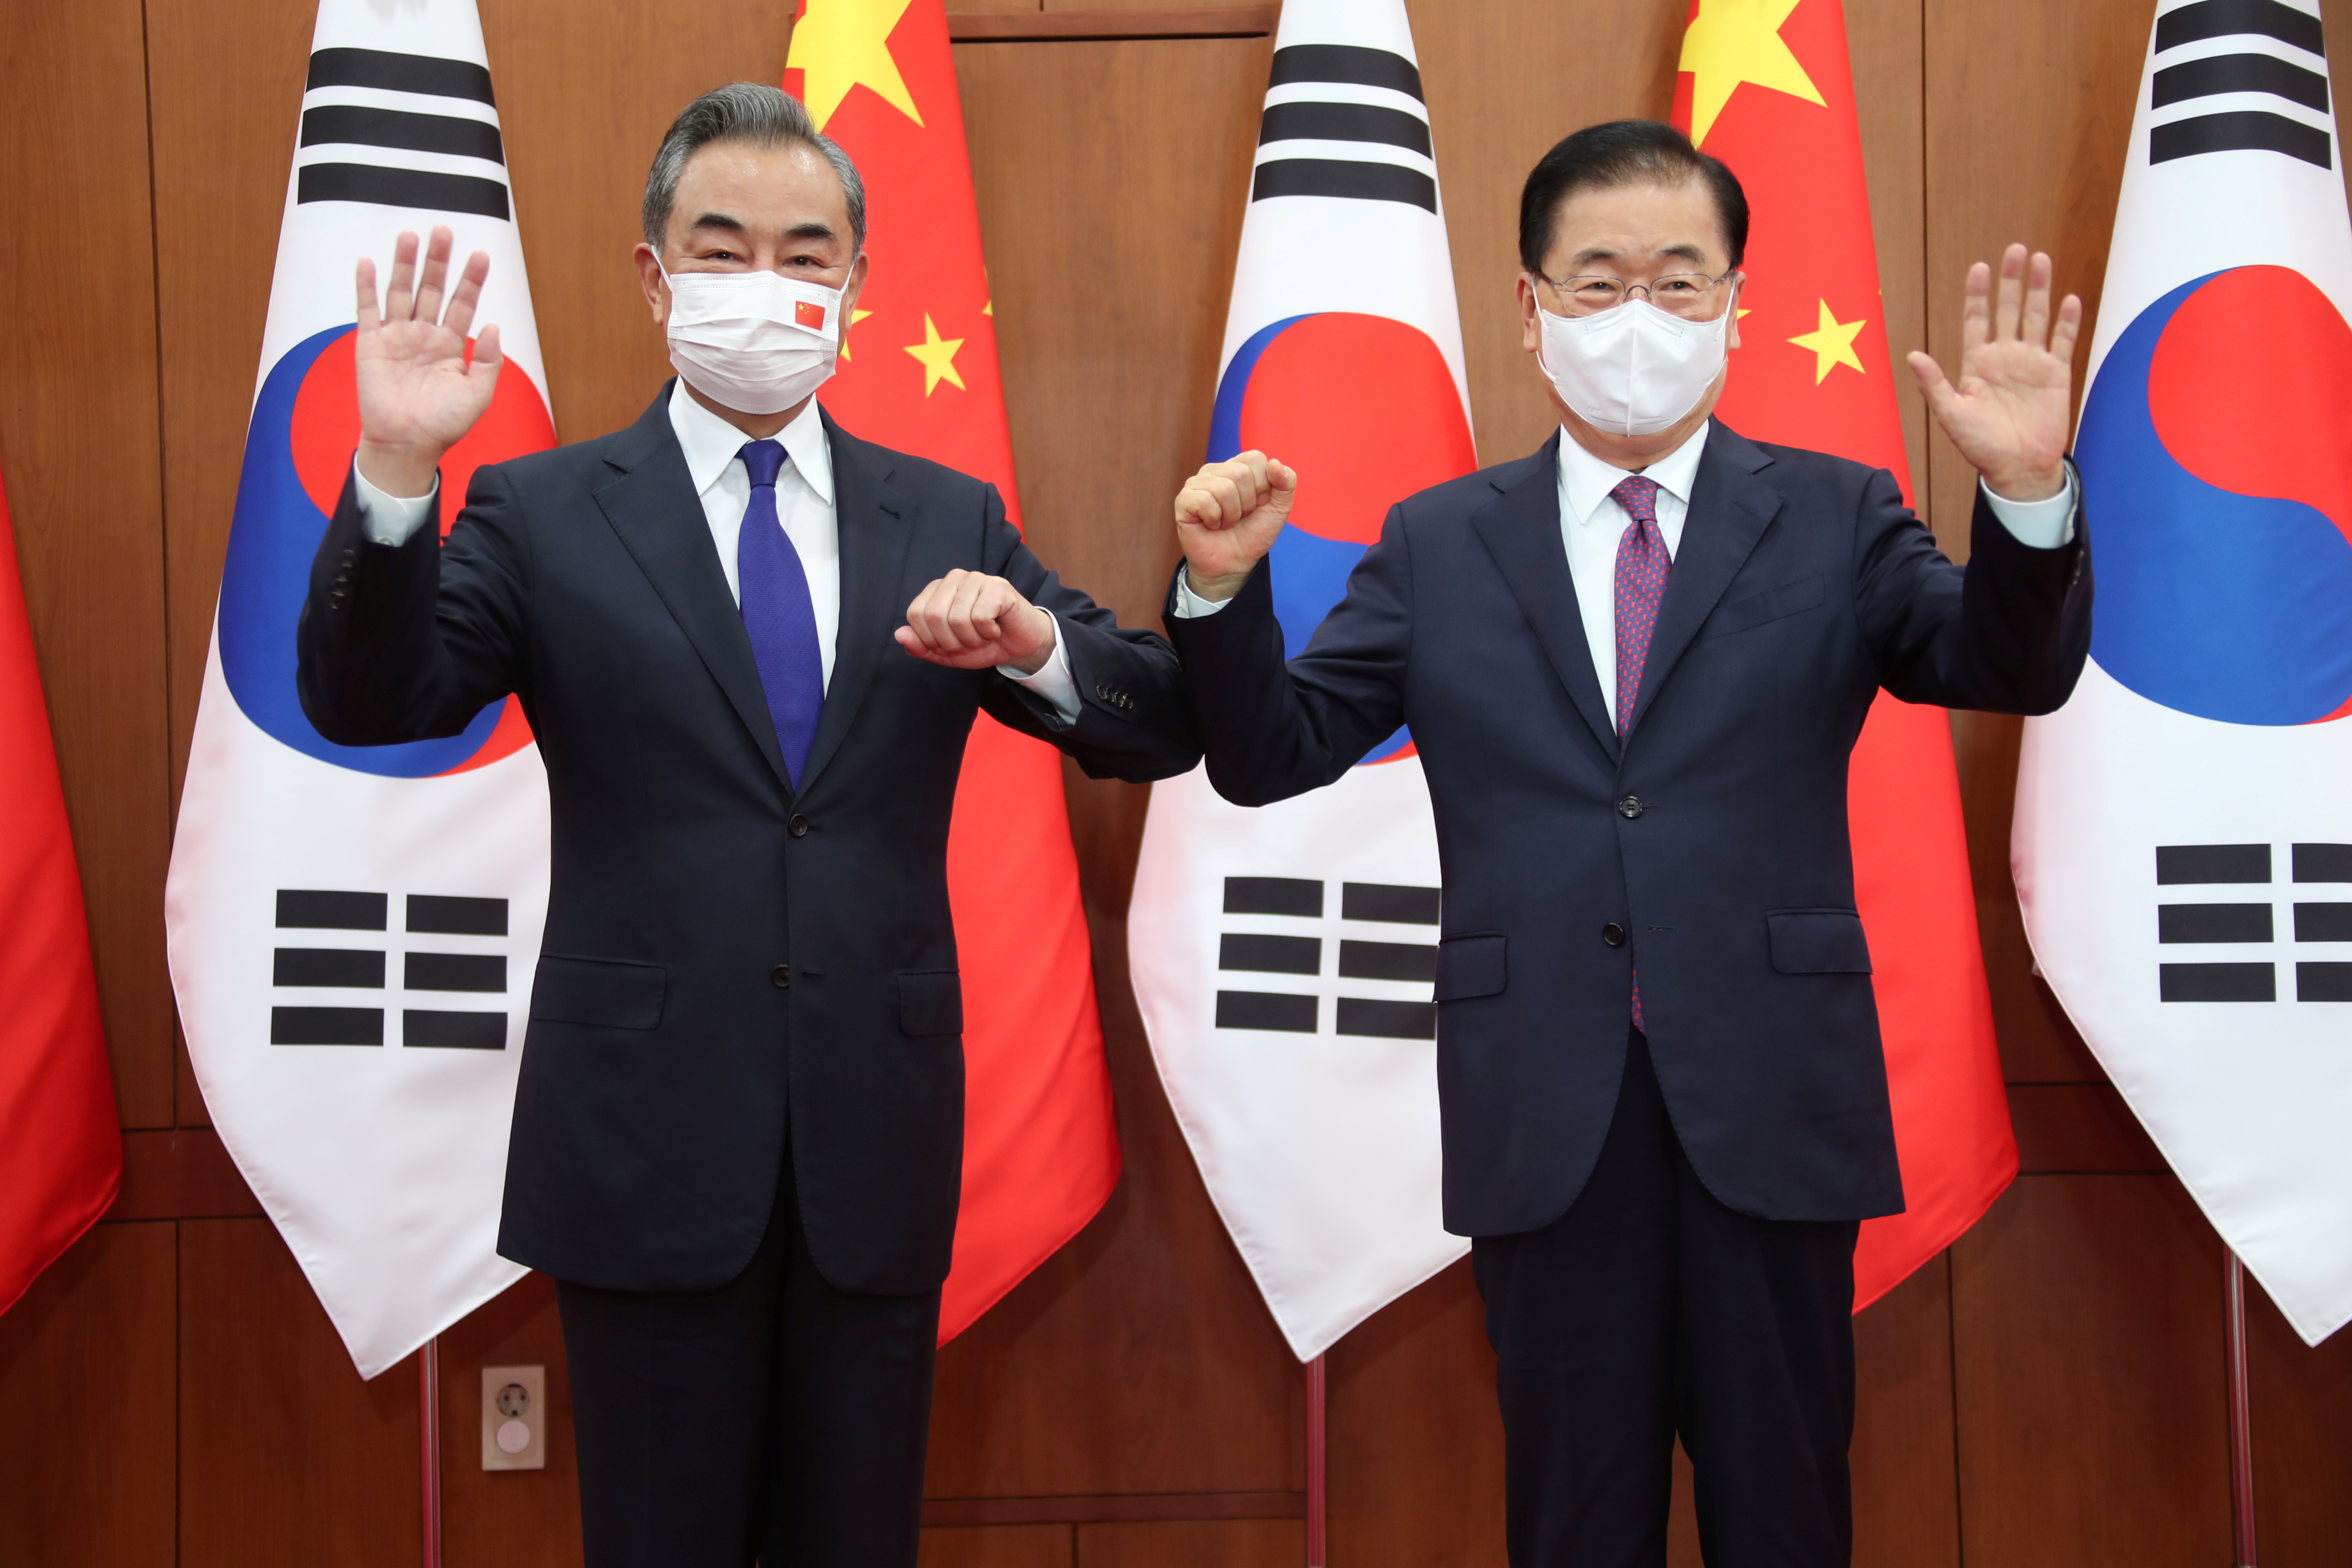 Chinese Foreign Minister Wang Yi poses for photographs with his South Korean counterpart Chung Eui-yong at Foreign Ministry in Seoul